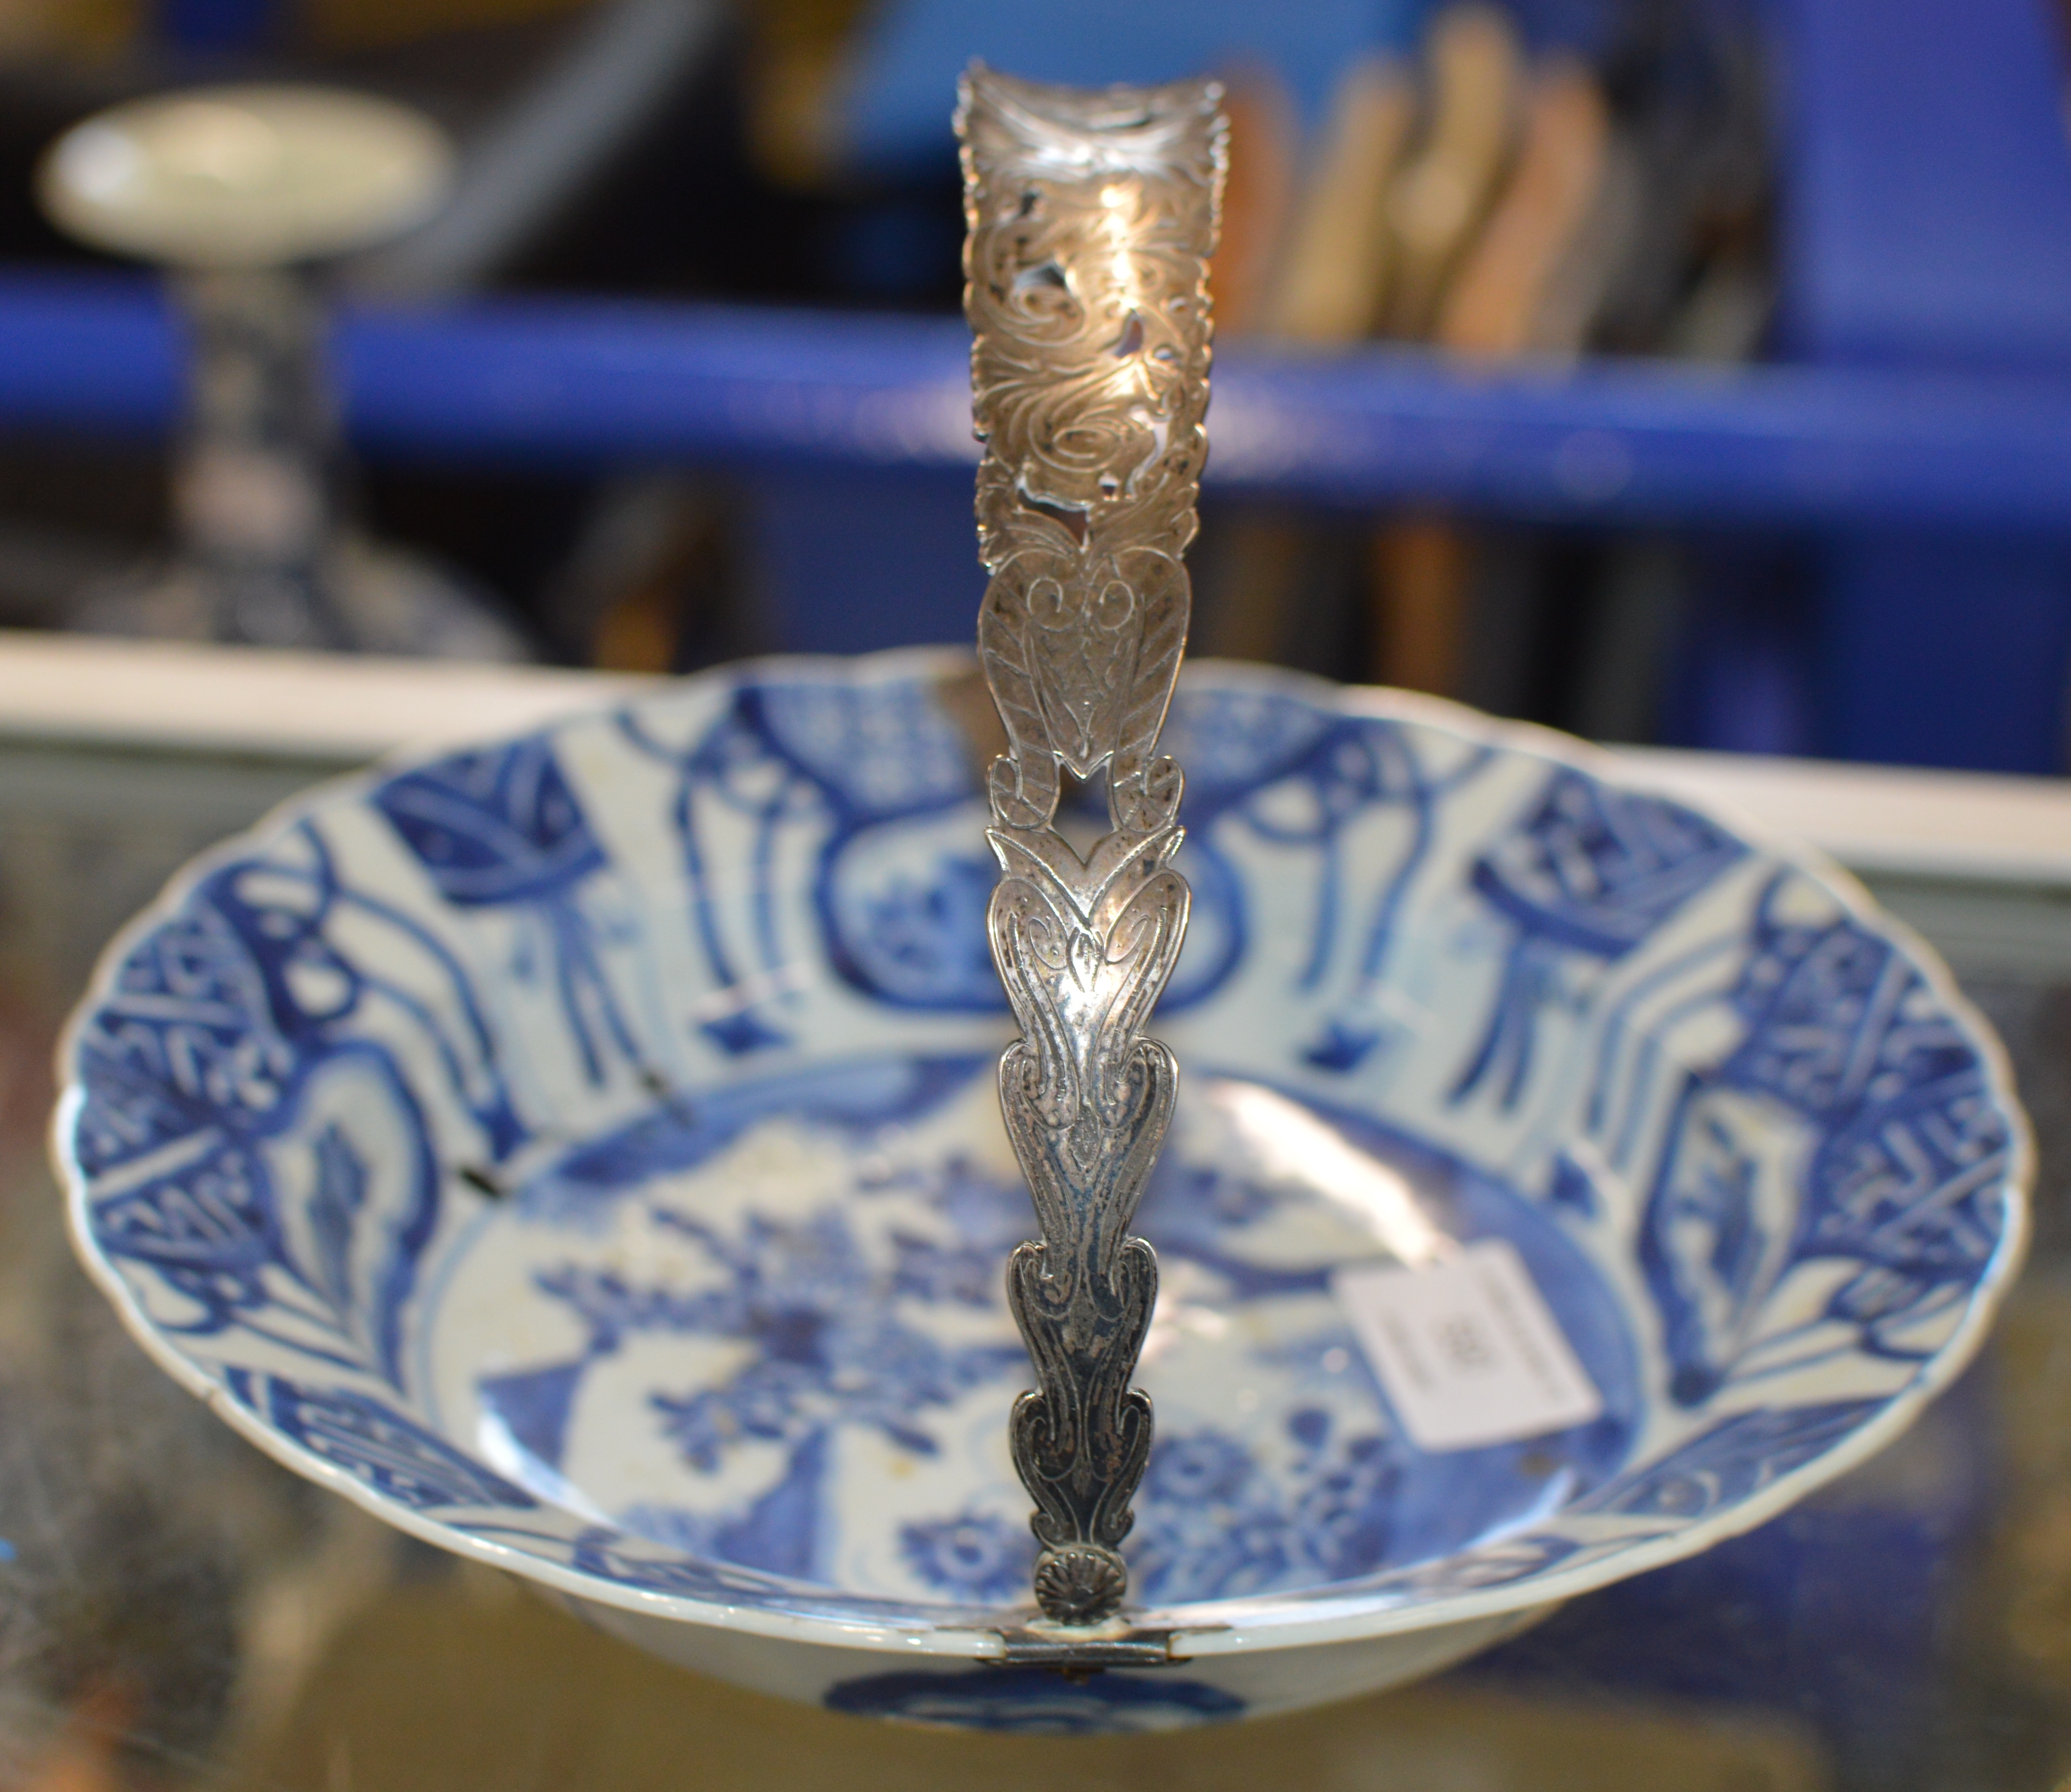 8½" DIAMETER OLD CHINESE BLUE & WHITE PORCELAIN BOWL WITH LATER APPLIED SILVER MOUNTS - Image 2 of 3